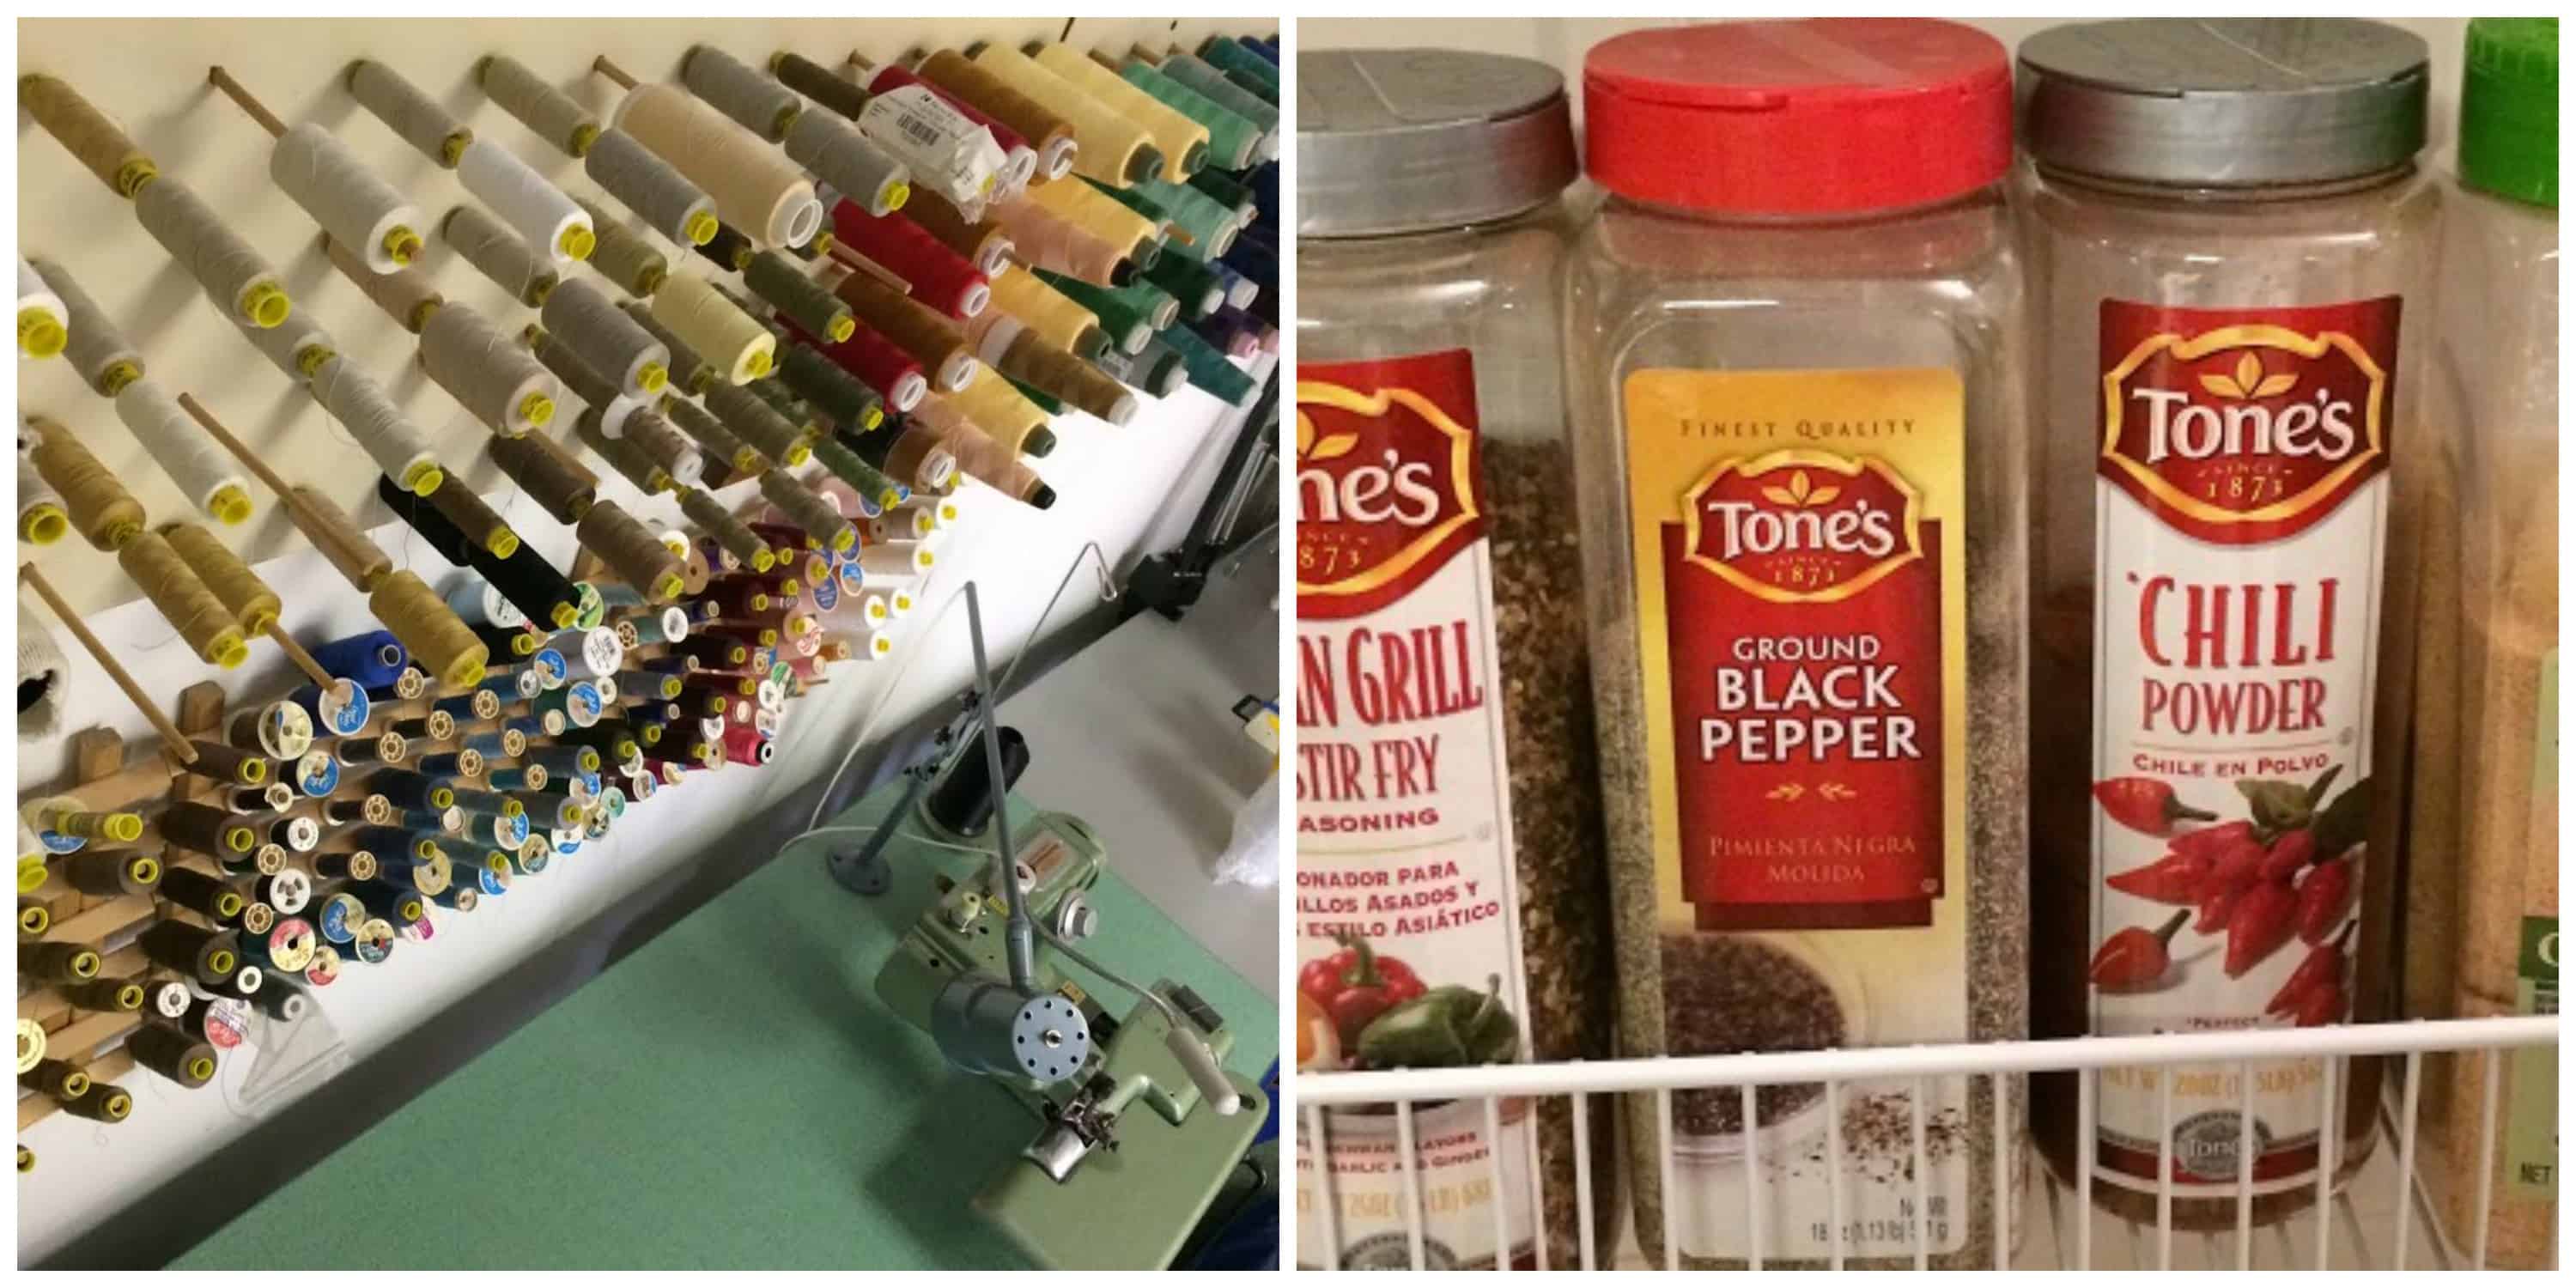 Organize thread and spices